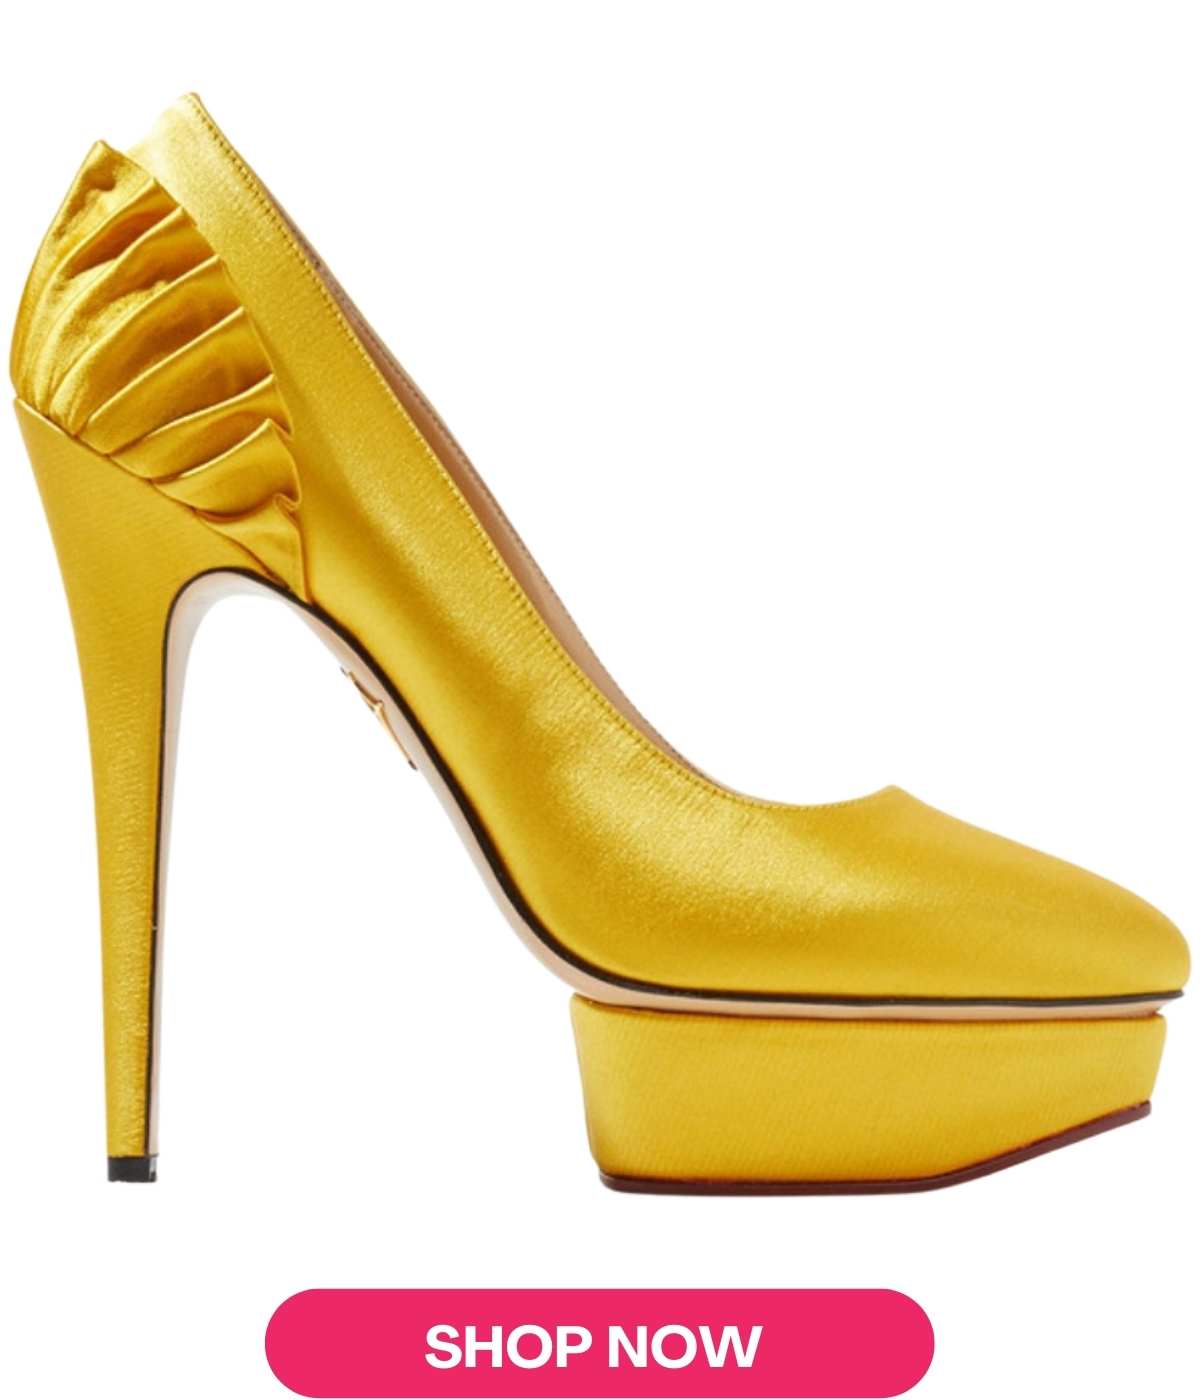 Unique yellow high heels with platform with shop now button.